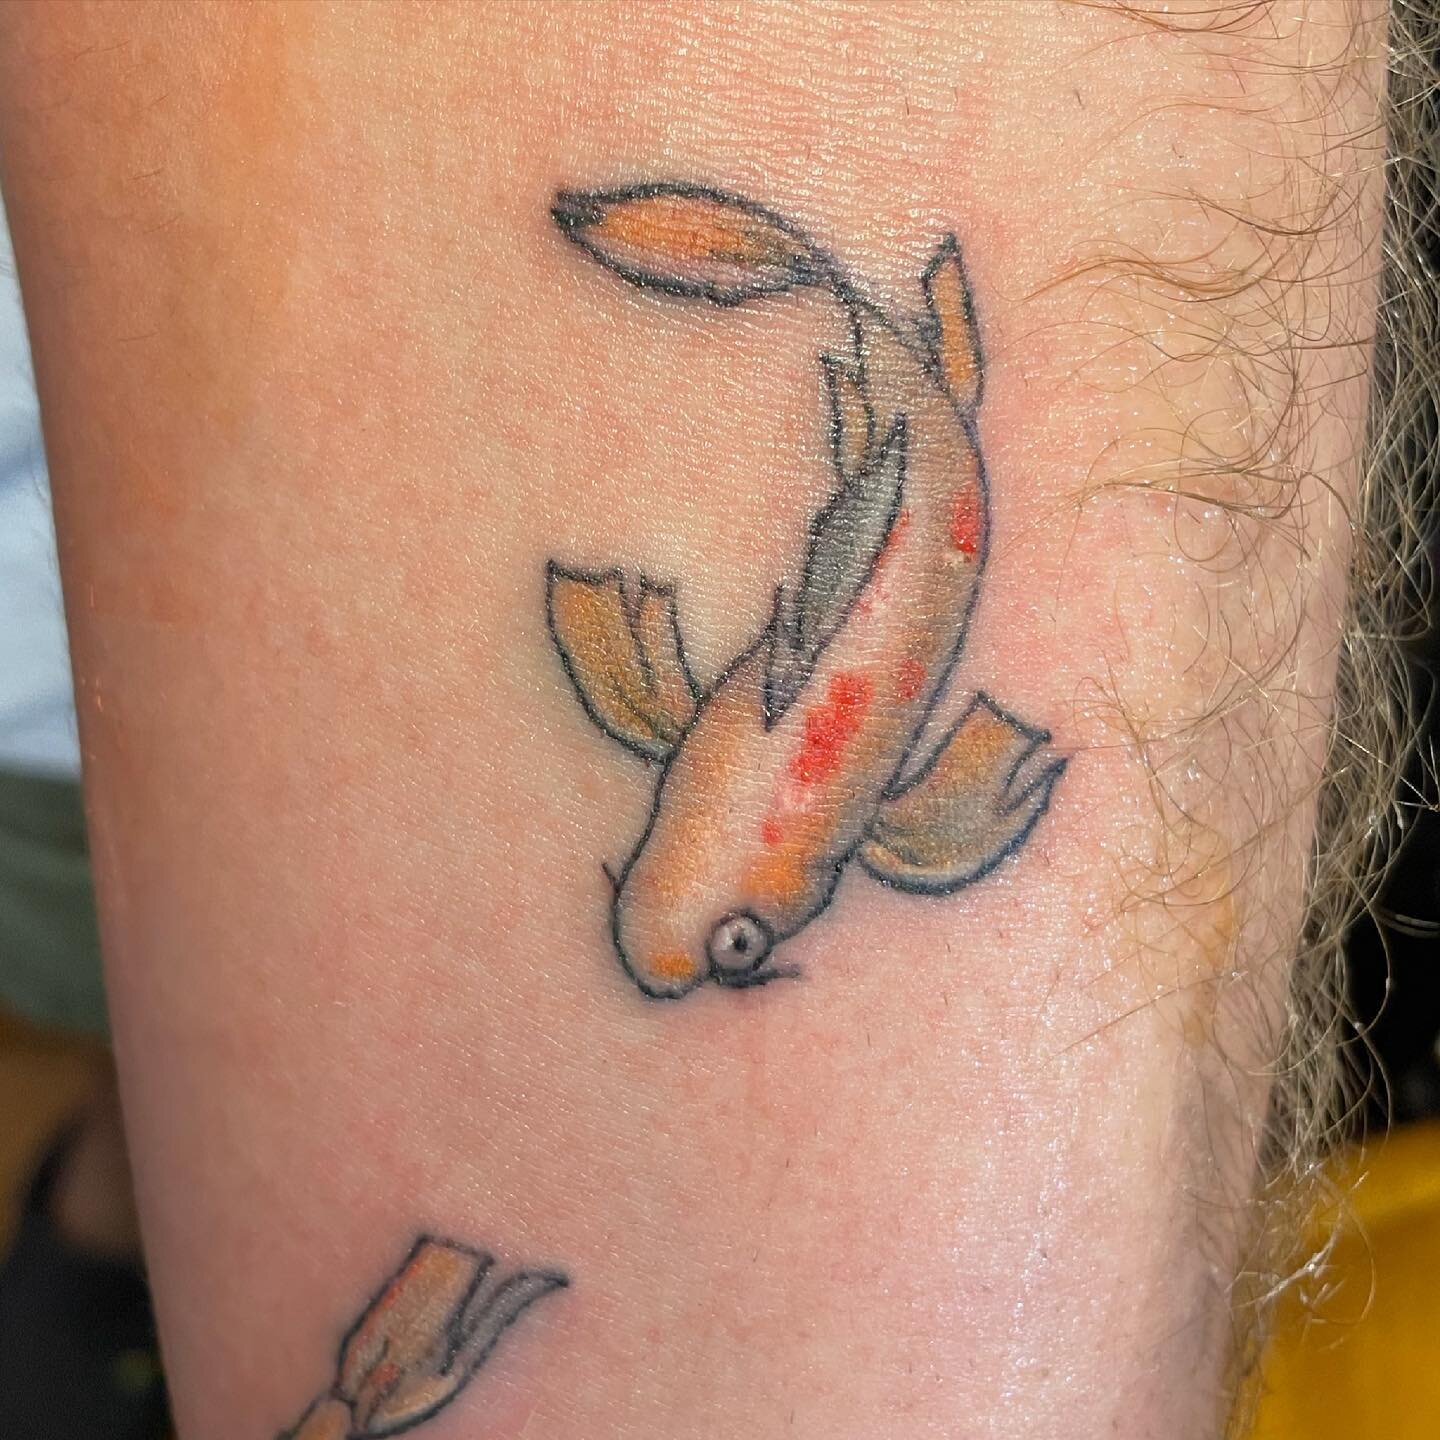 Koi fish 🧡
Thank you Alex for your patience and for letting me use your arm as a canvas. Hope you like it! 

#tattoo #inked #koifish #tattoo #sandiego